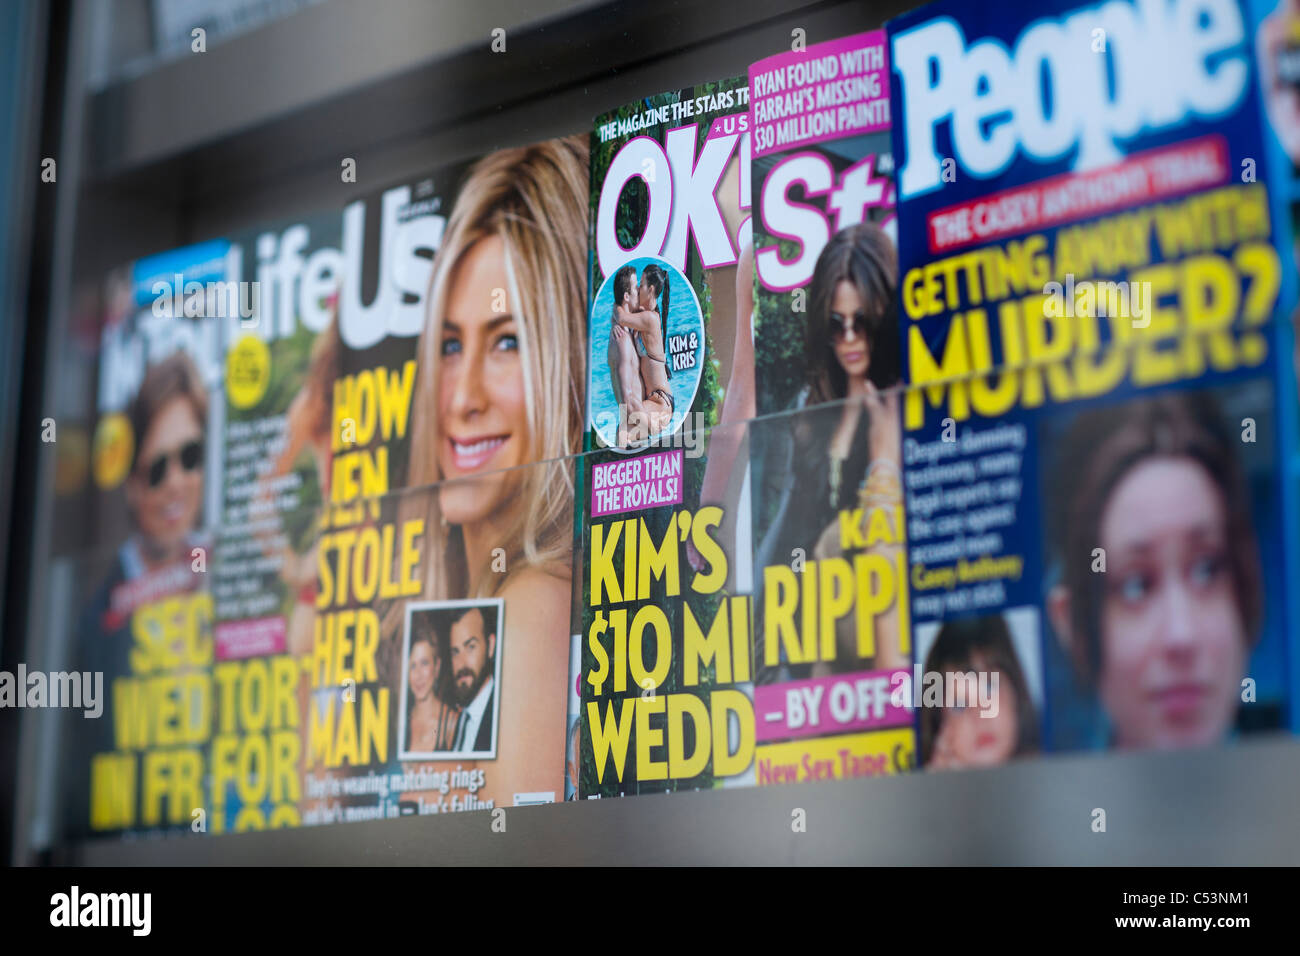 OK! Weekly magazine is seen with other celebrity tabloid magazines displayed in a news stand in New York Stock Photo